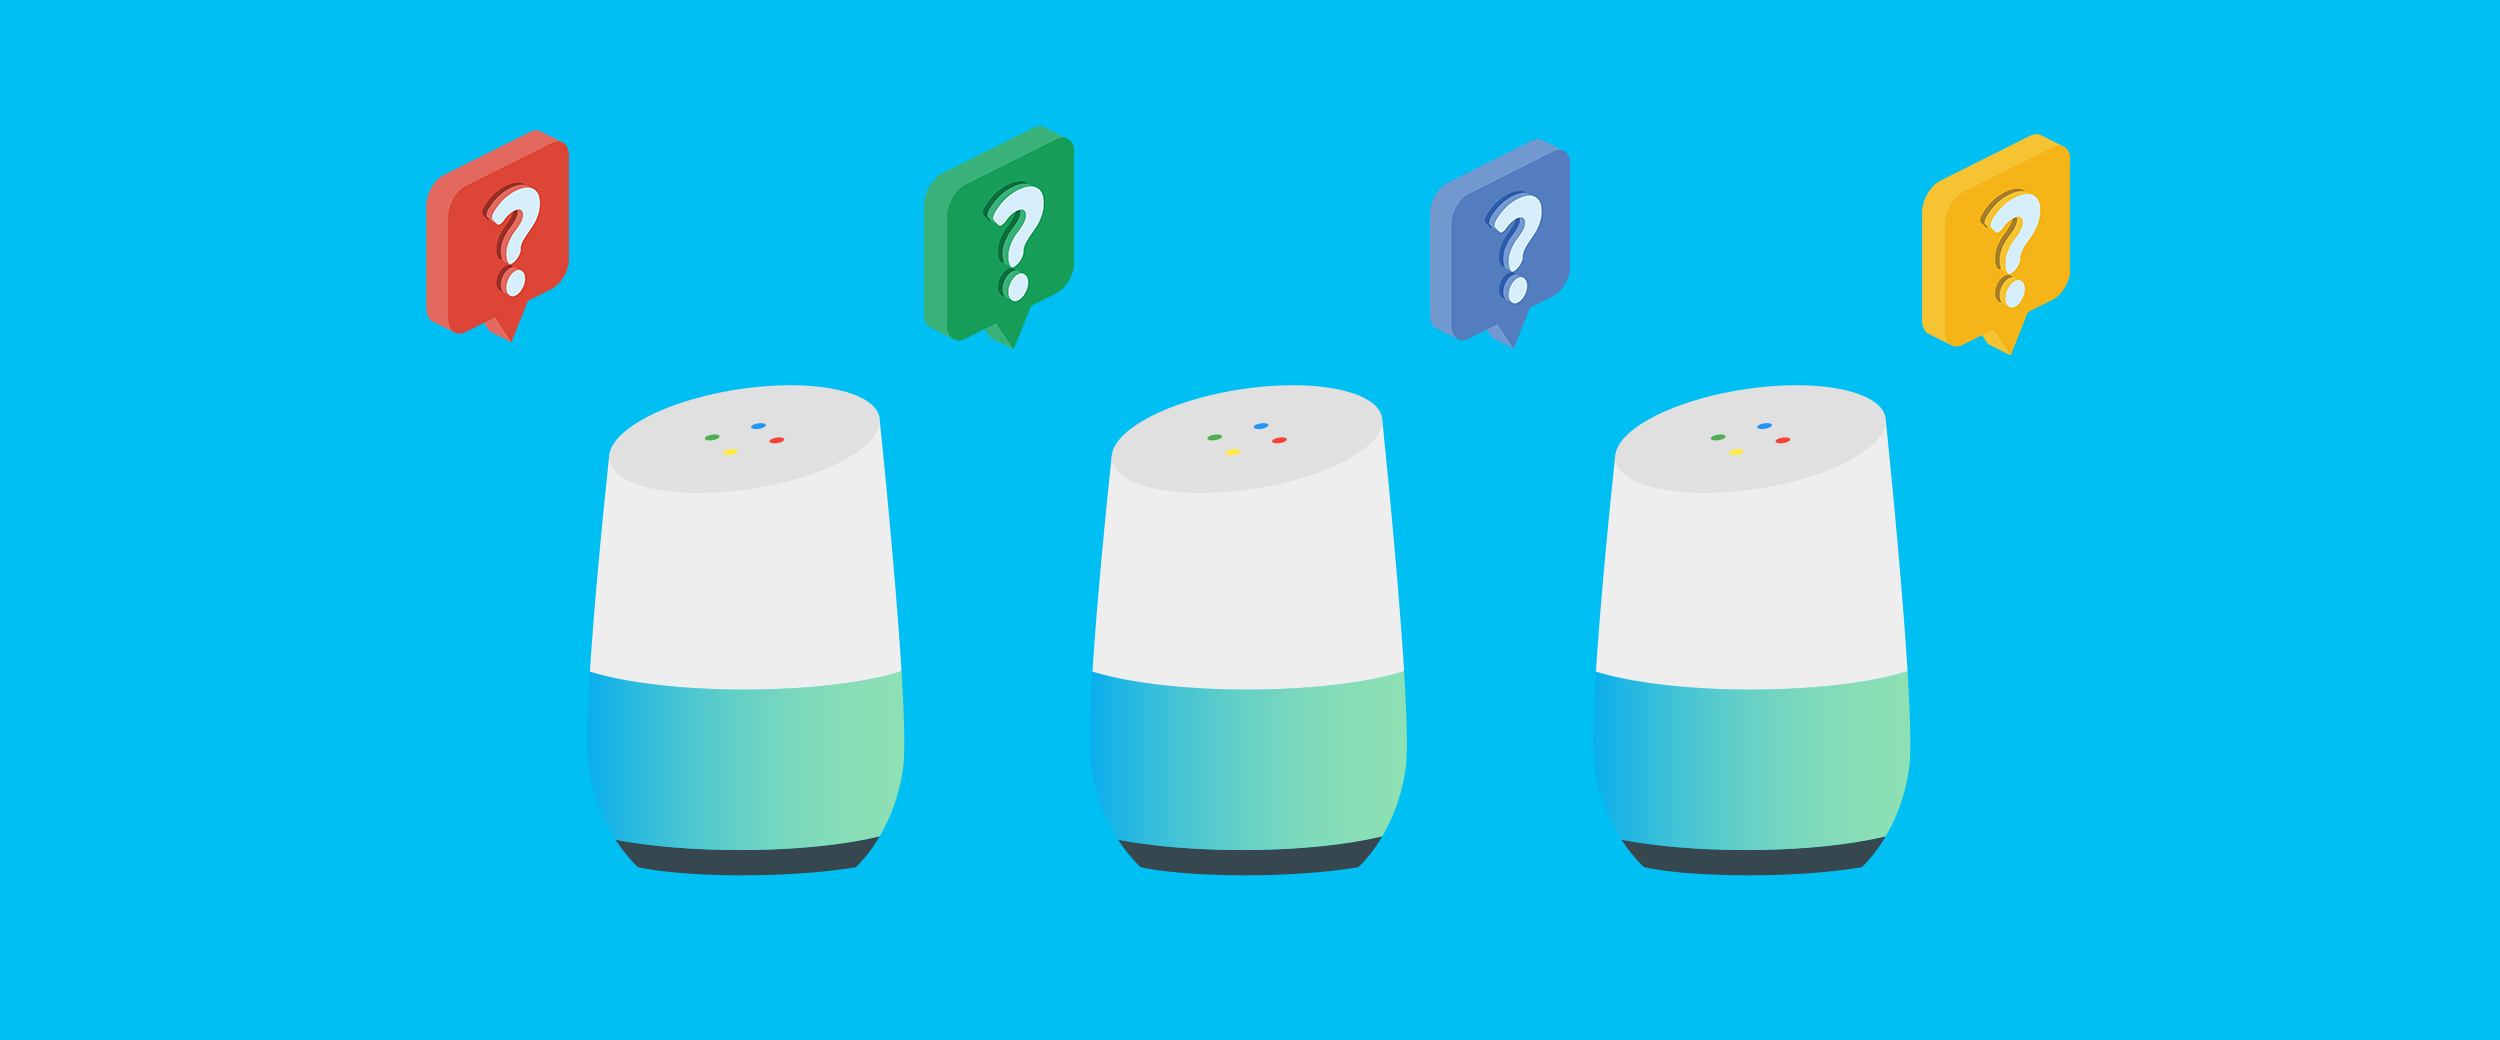 Google Home products with iconic question marks.